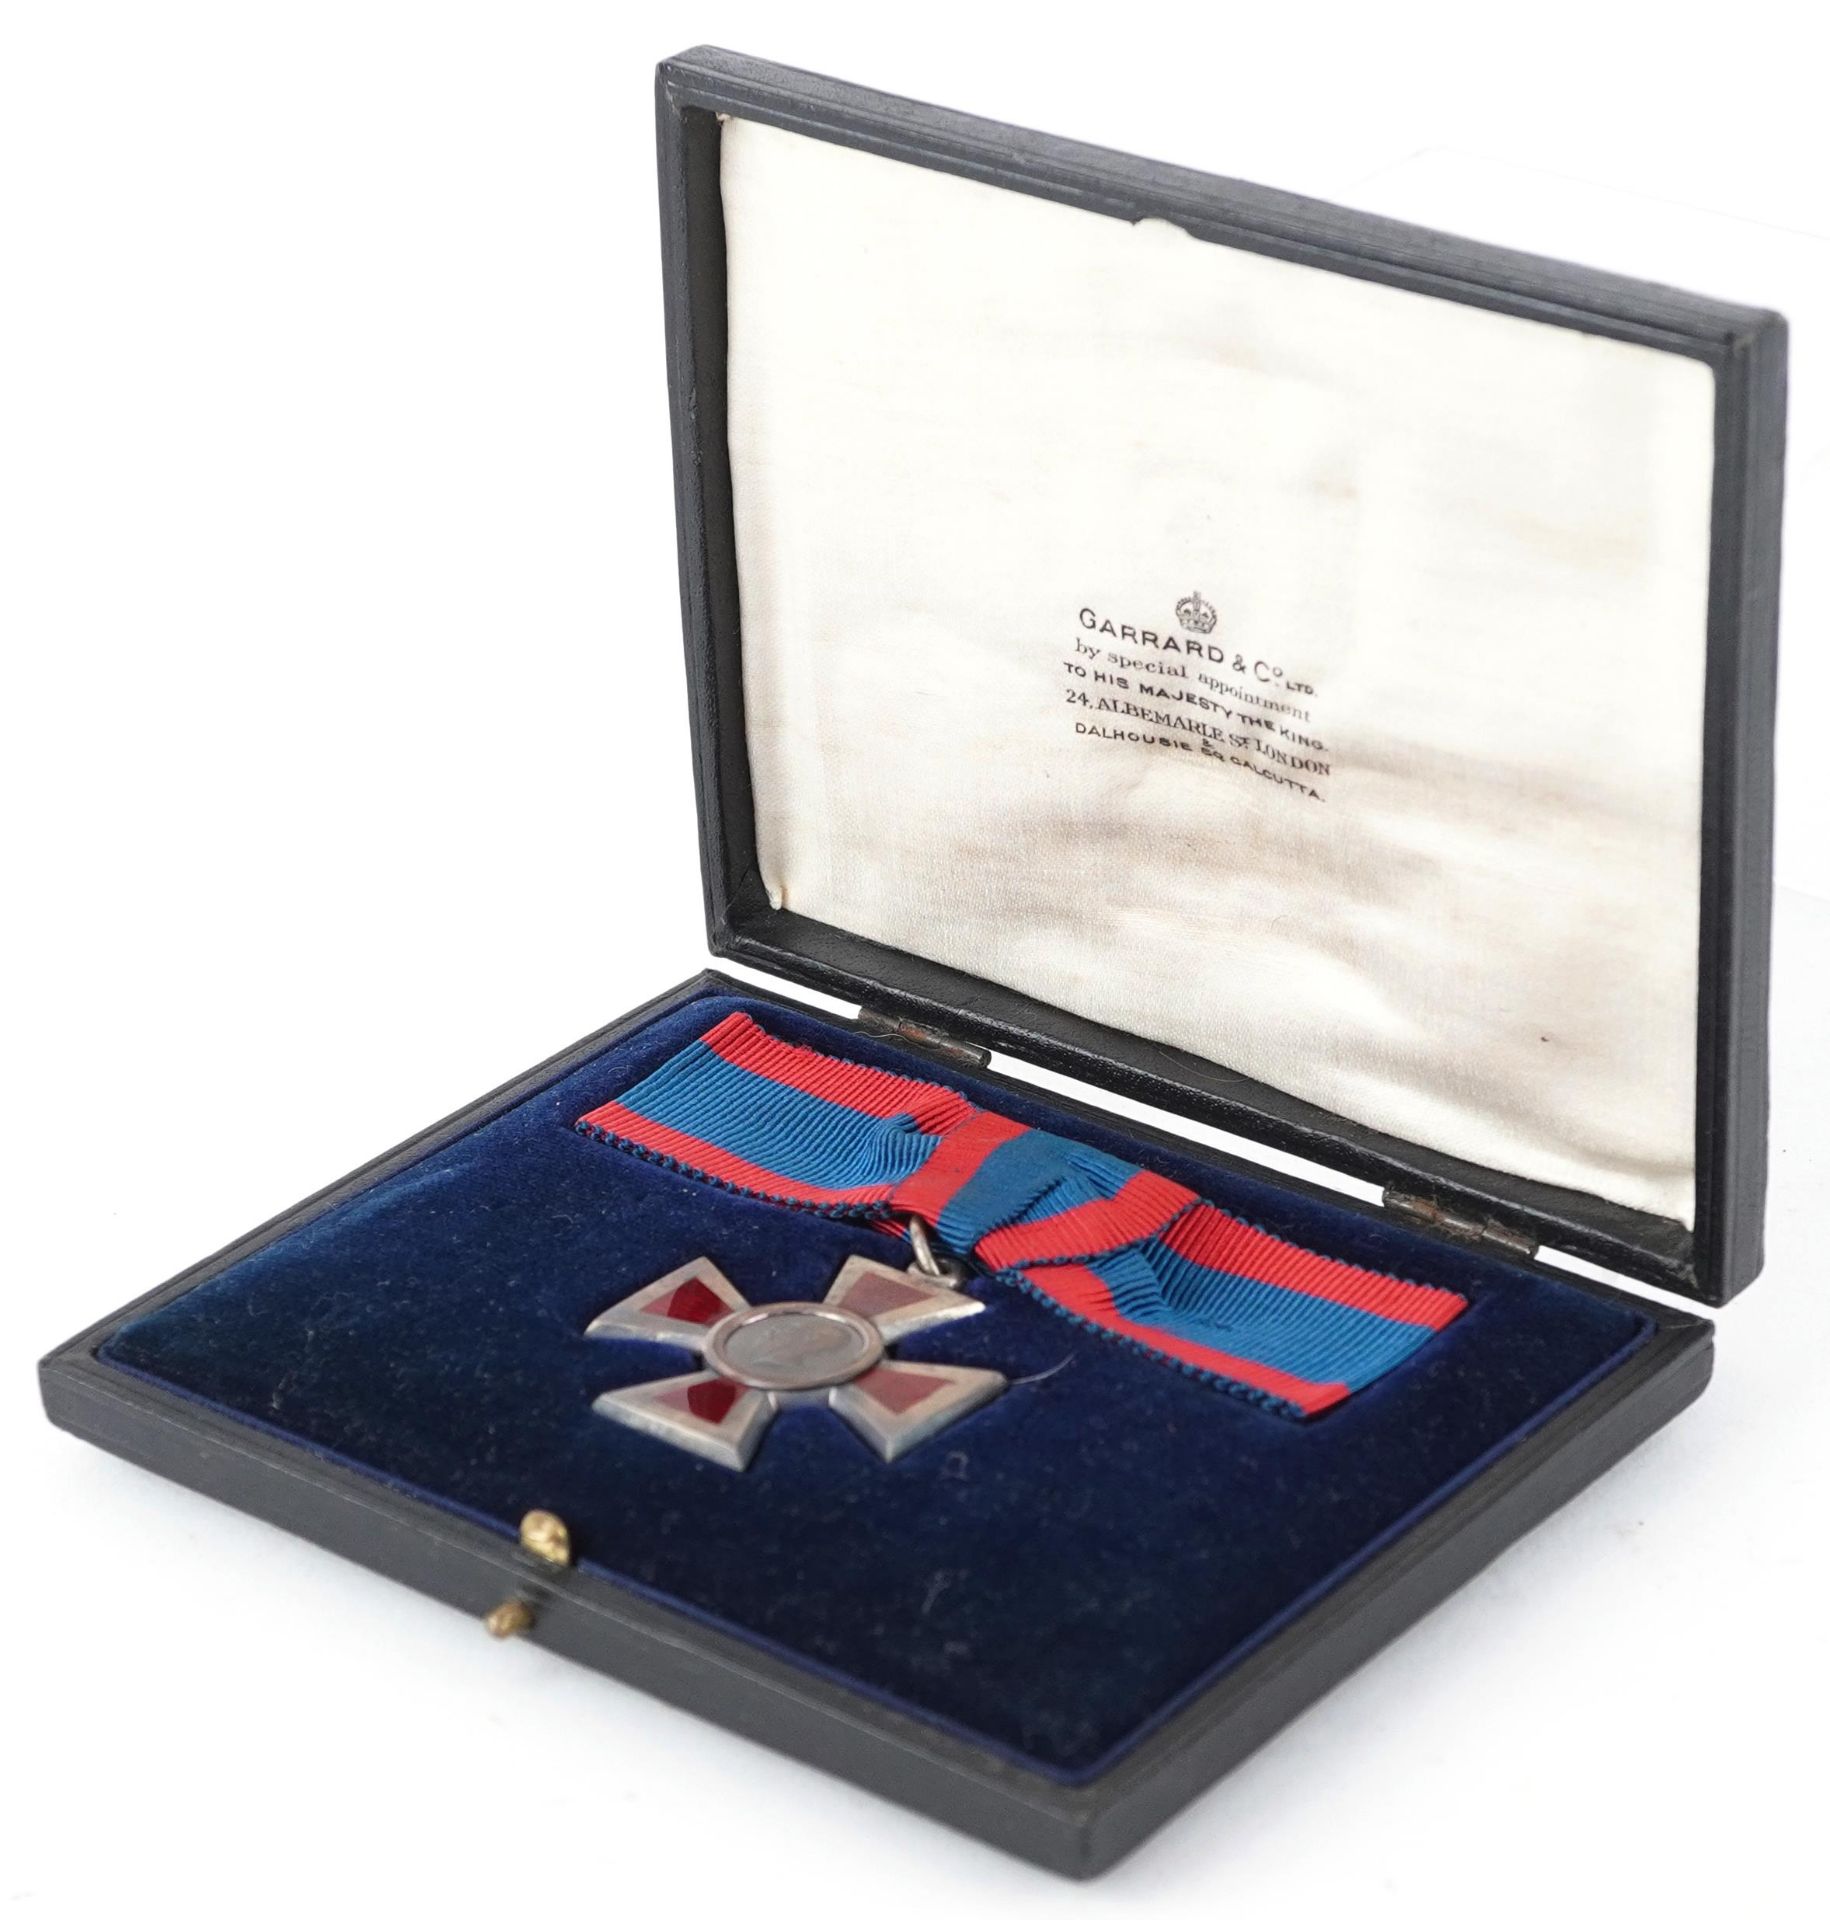 British Royal Red Cross medal housed in a Garrard & Co Limited box